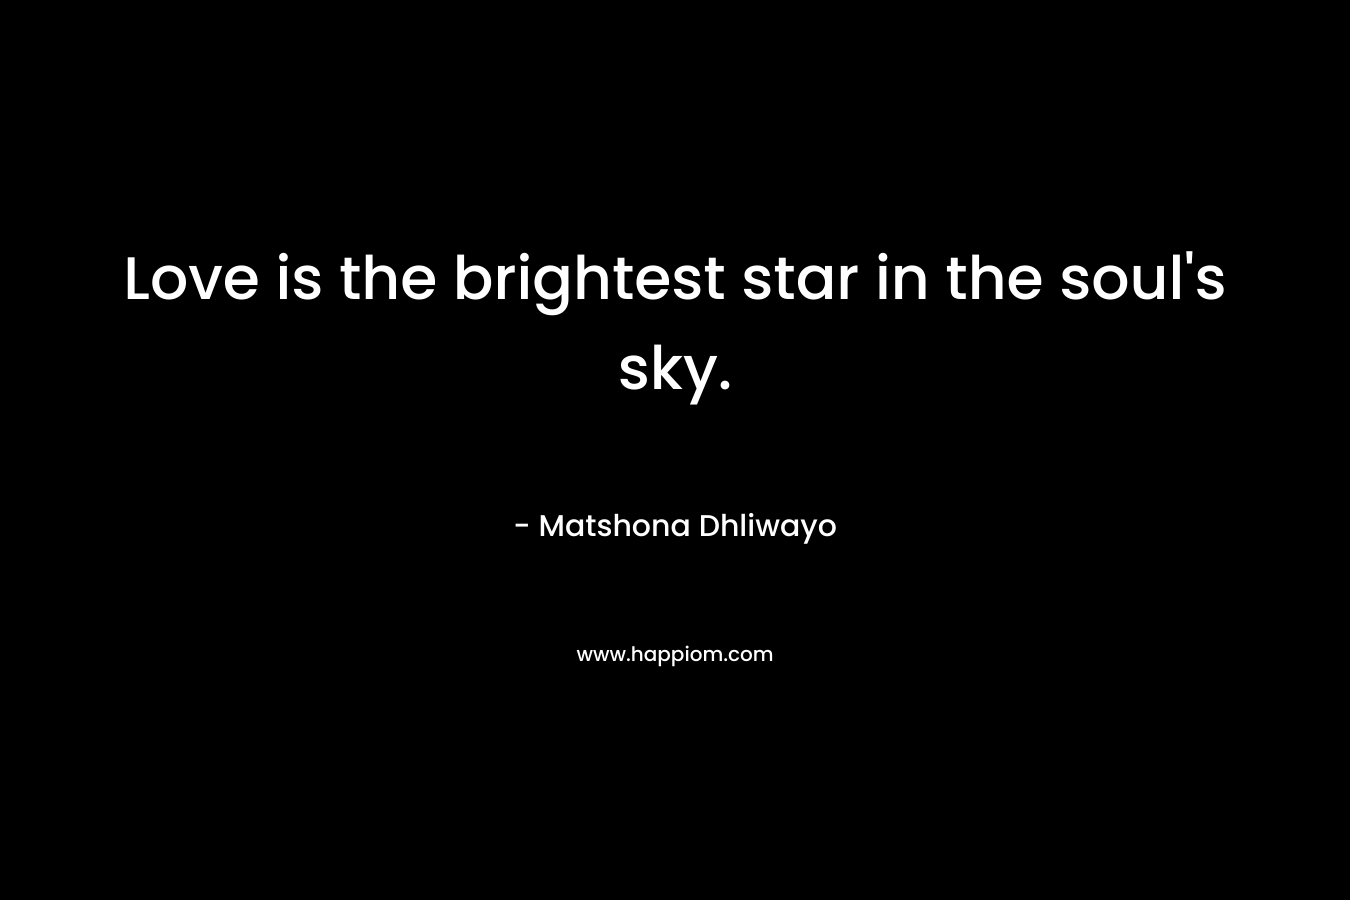 Love is the brightest star in the soul's sky.